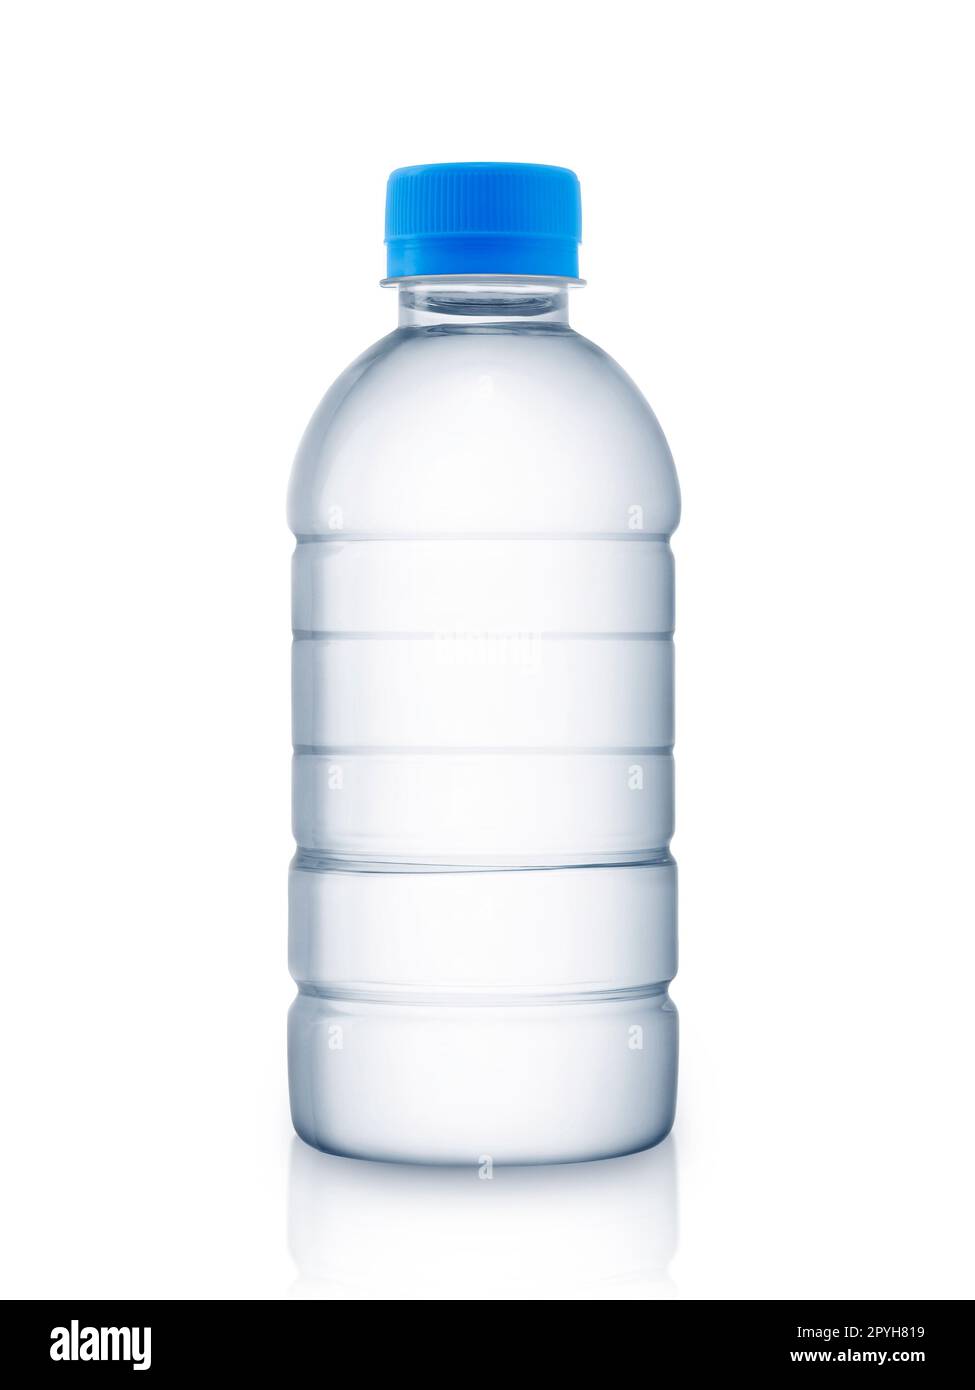 https://c8.alamy.com/comp/2PYH819/empty-clean-and-clear-water-bottle-isolated-on-with-isolated-on-a-white-background-2PYH819.jpg